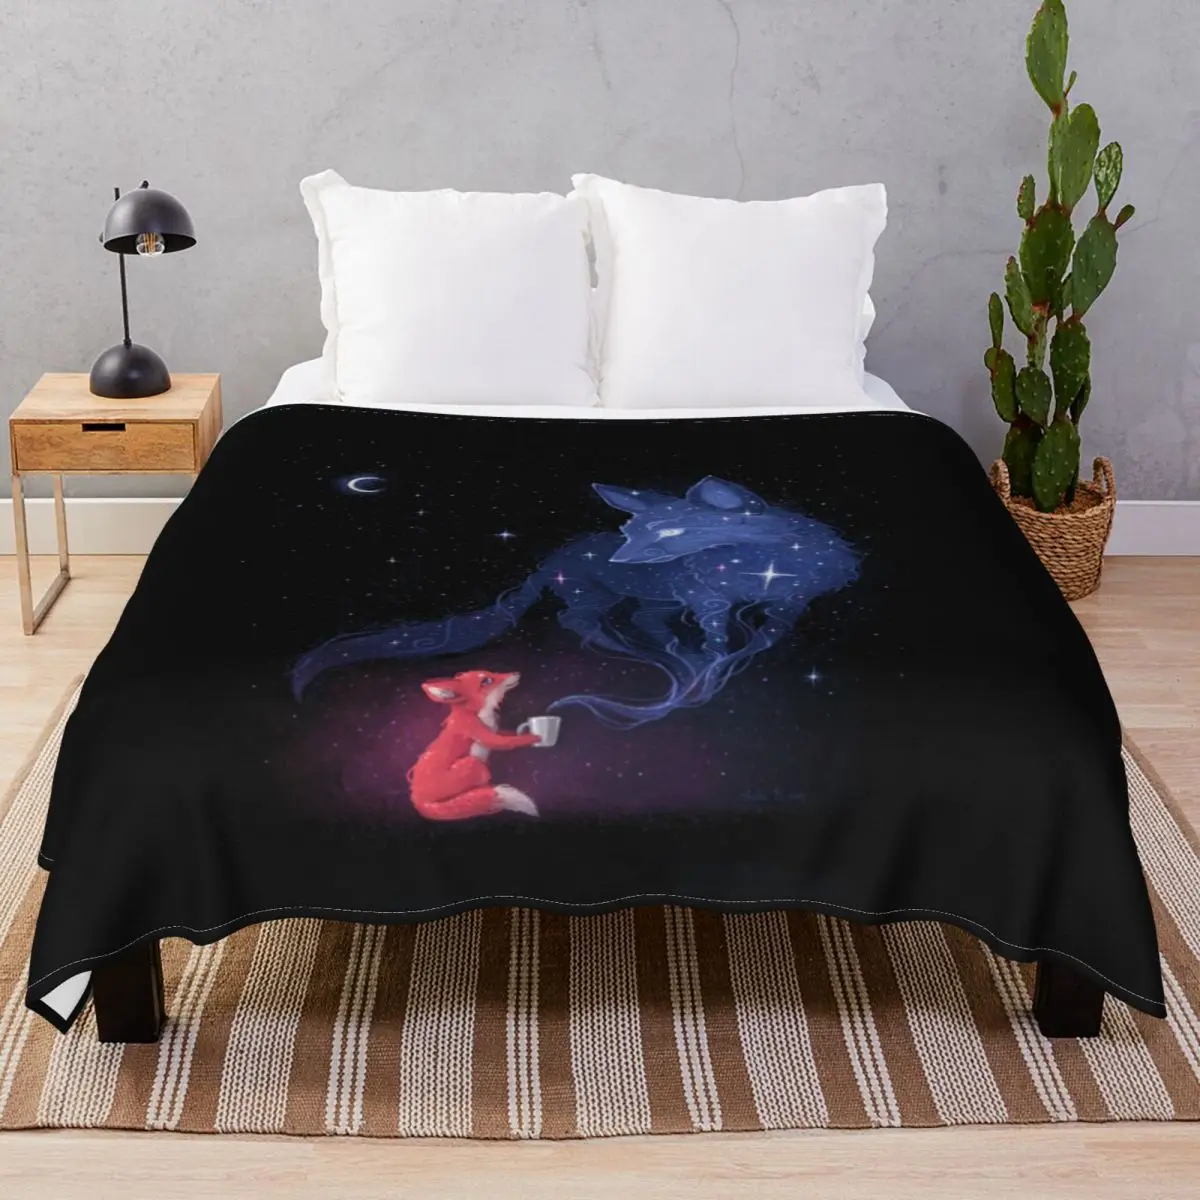 Celestial Blankets Flannel Print Soft Throw Blanket for Bedding Home Couch Travel Office